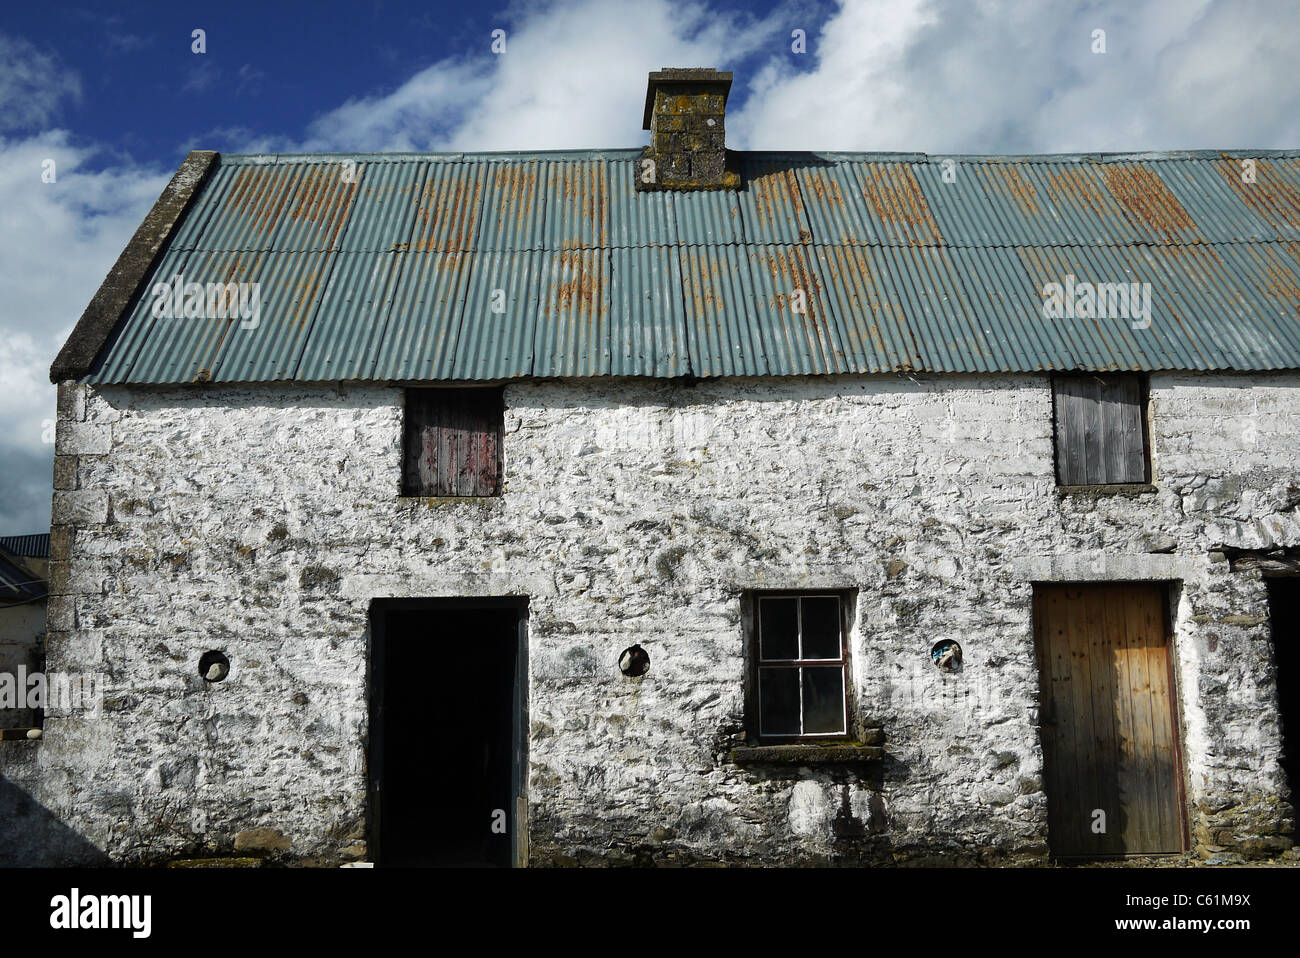 Derelict old barns and buildings in Ireland Eire Stock Photo